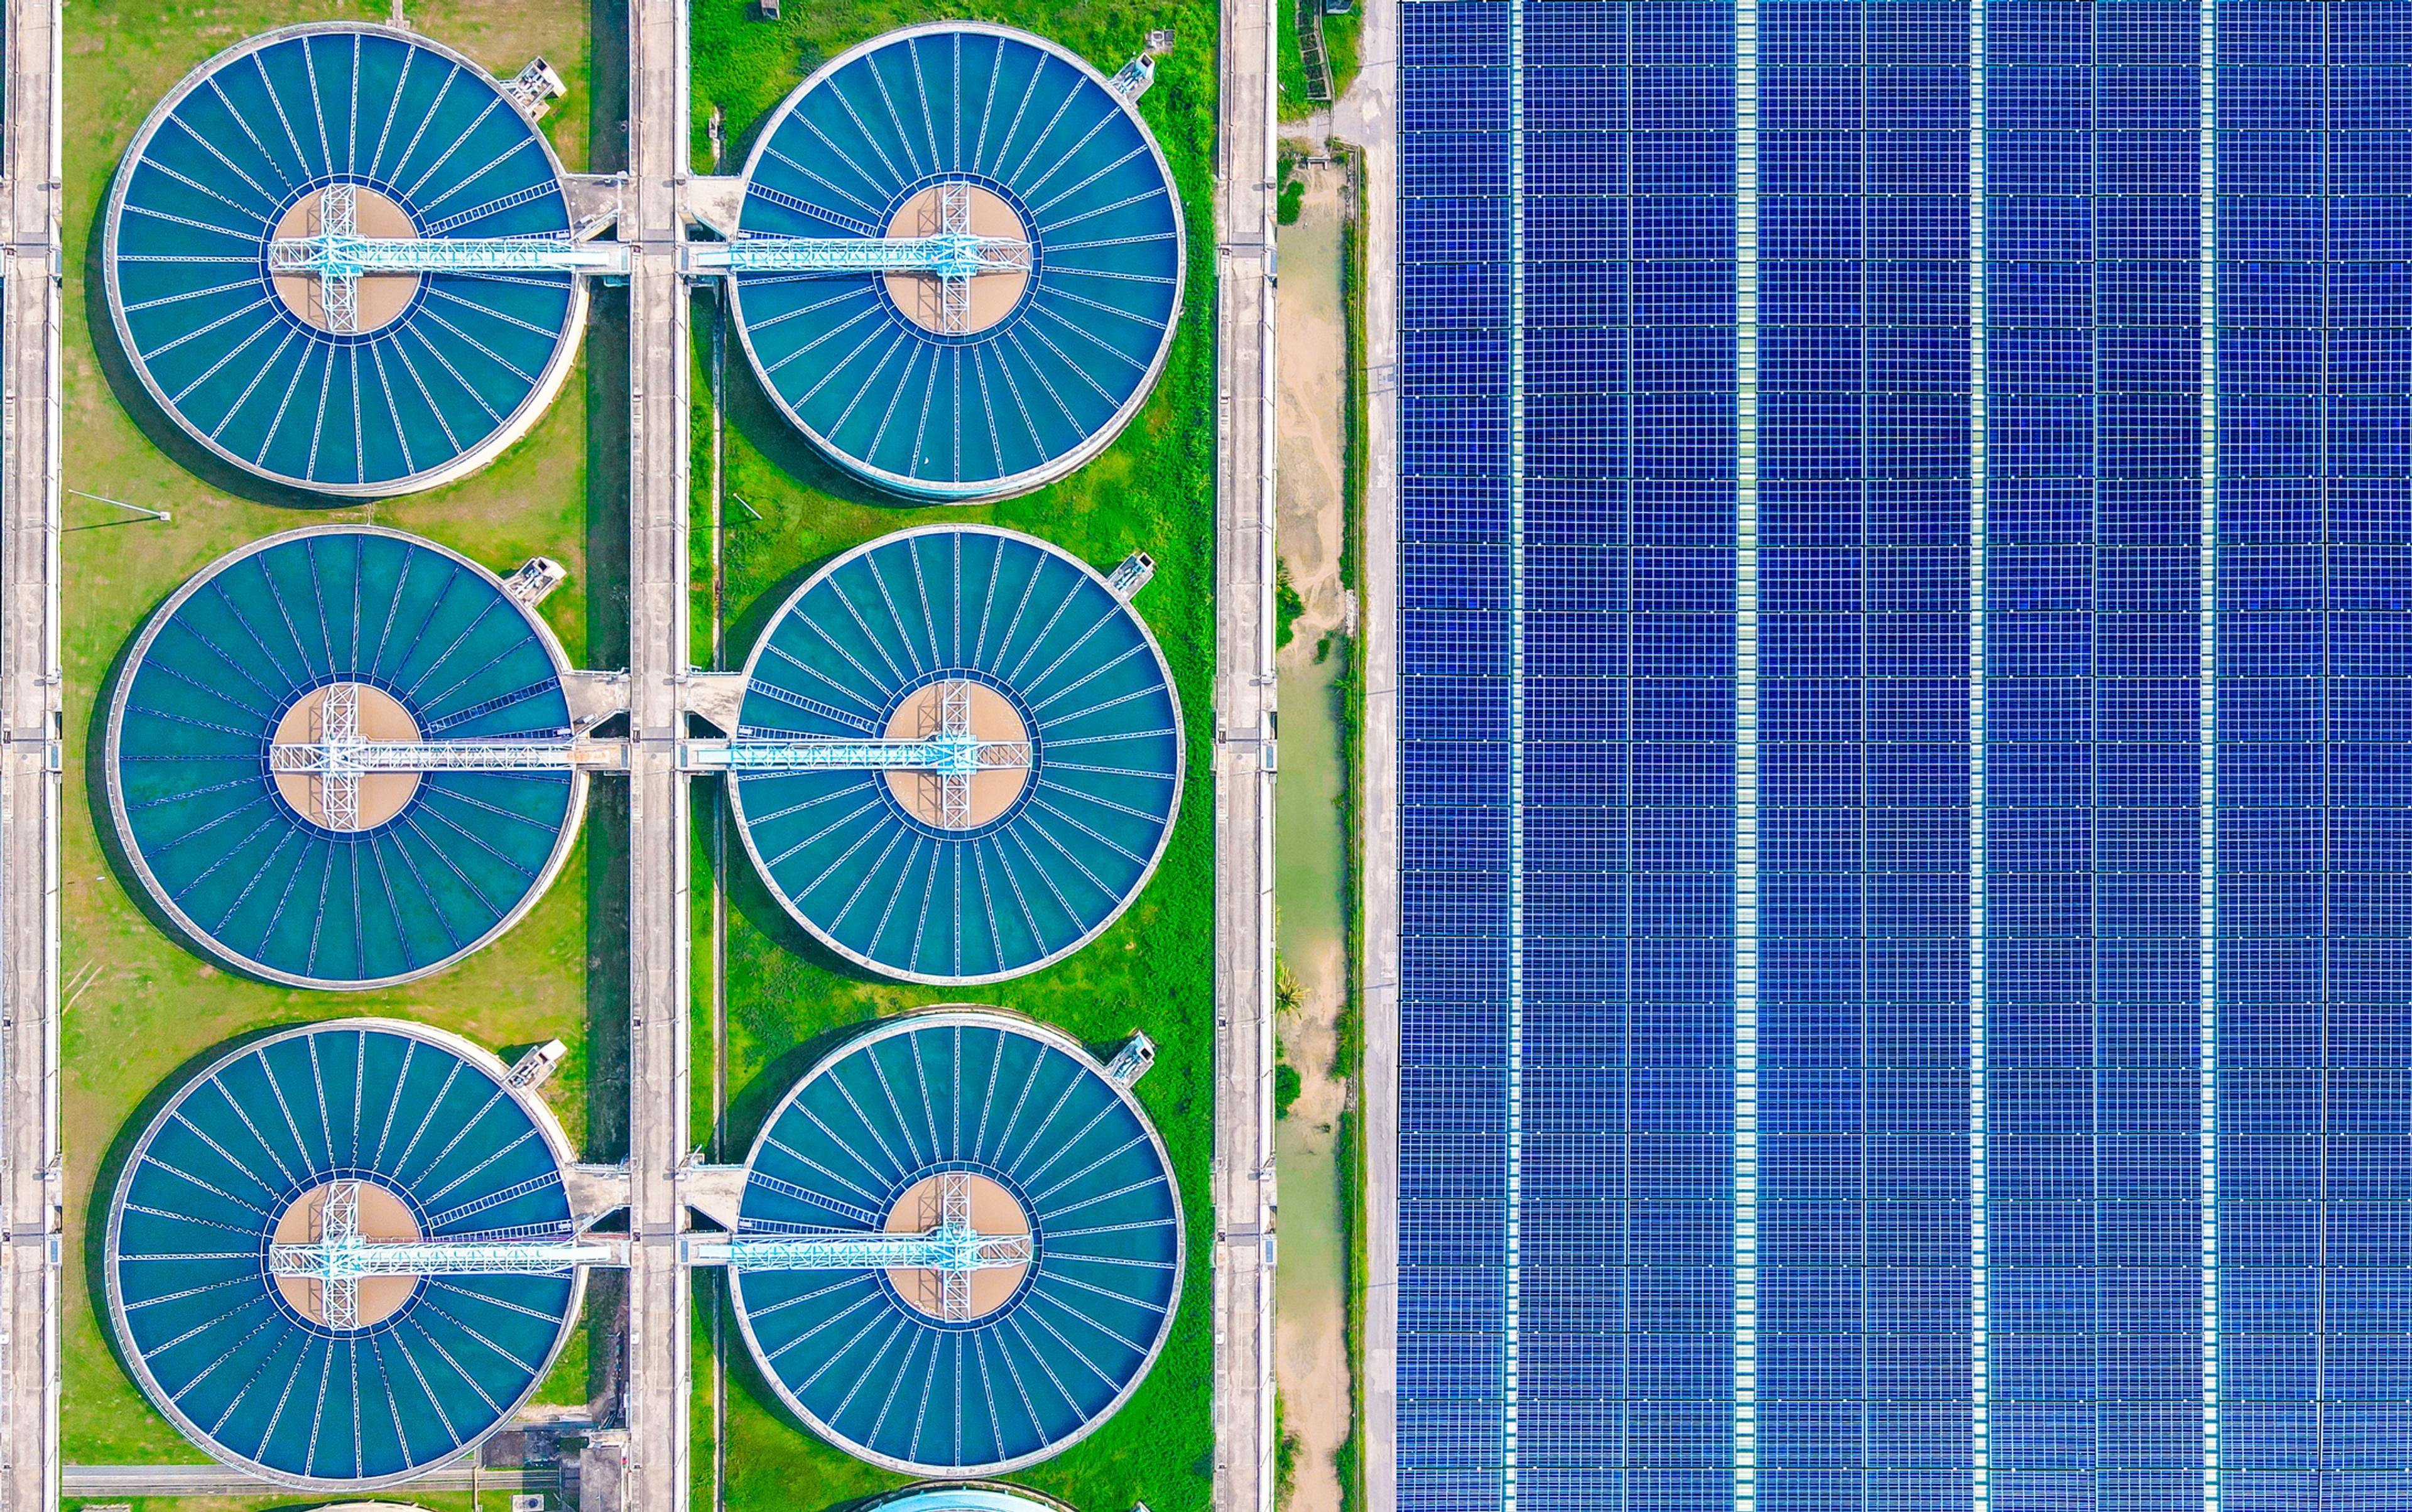 Aerial view of solar cells near a wastewater treatment pond